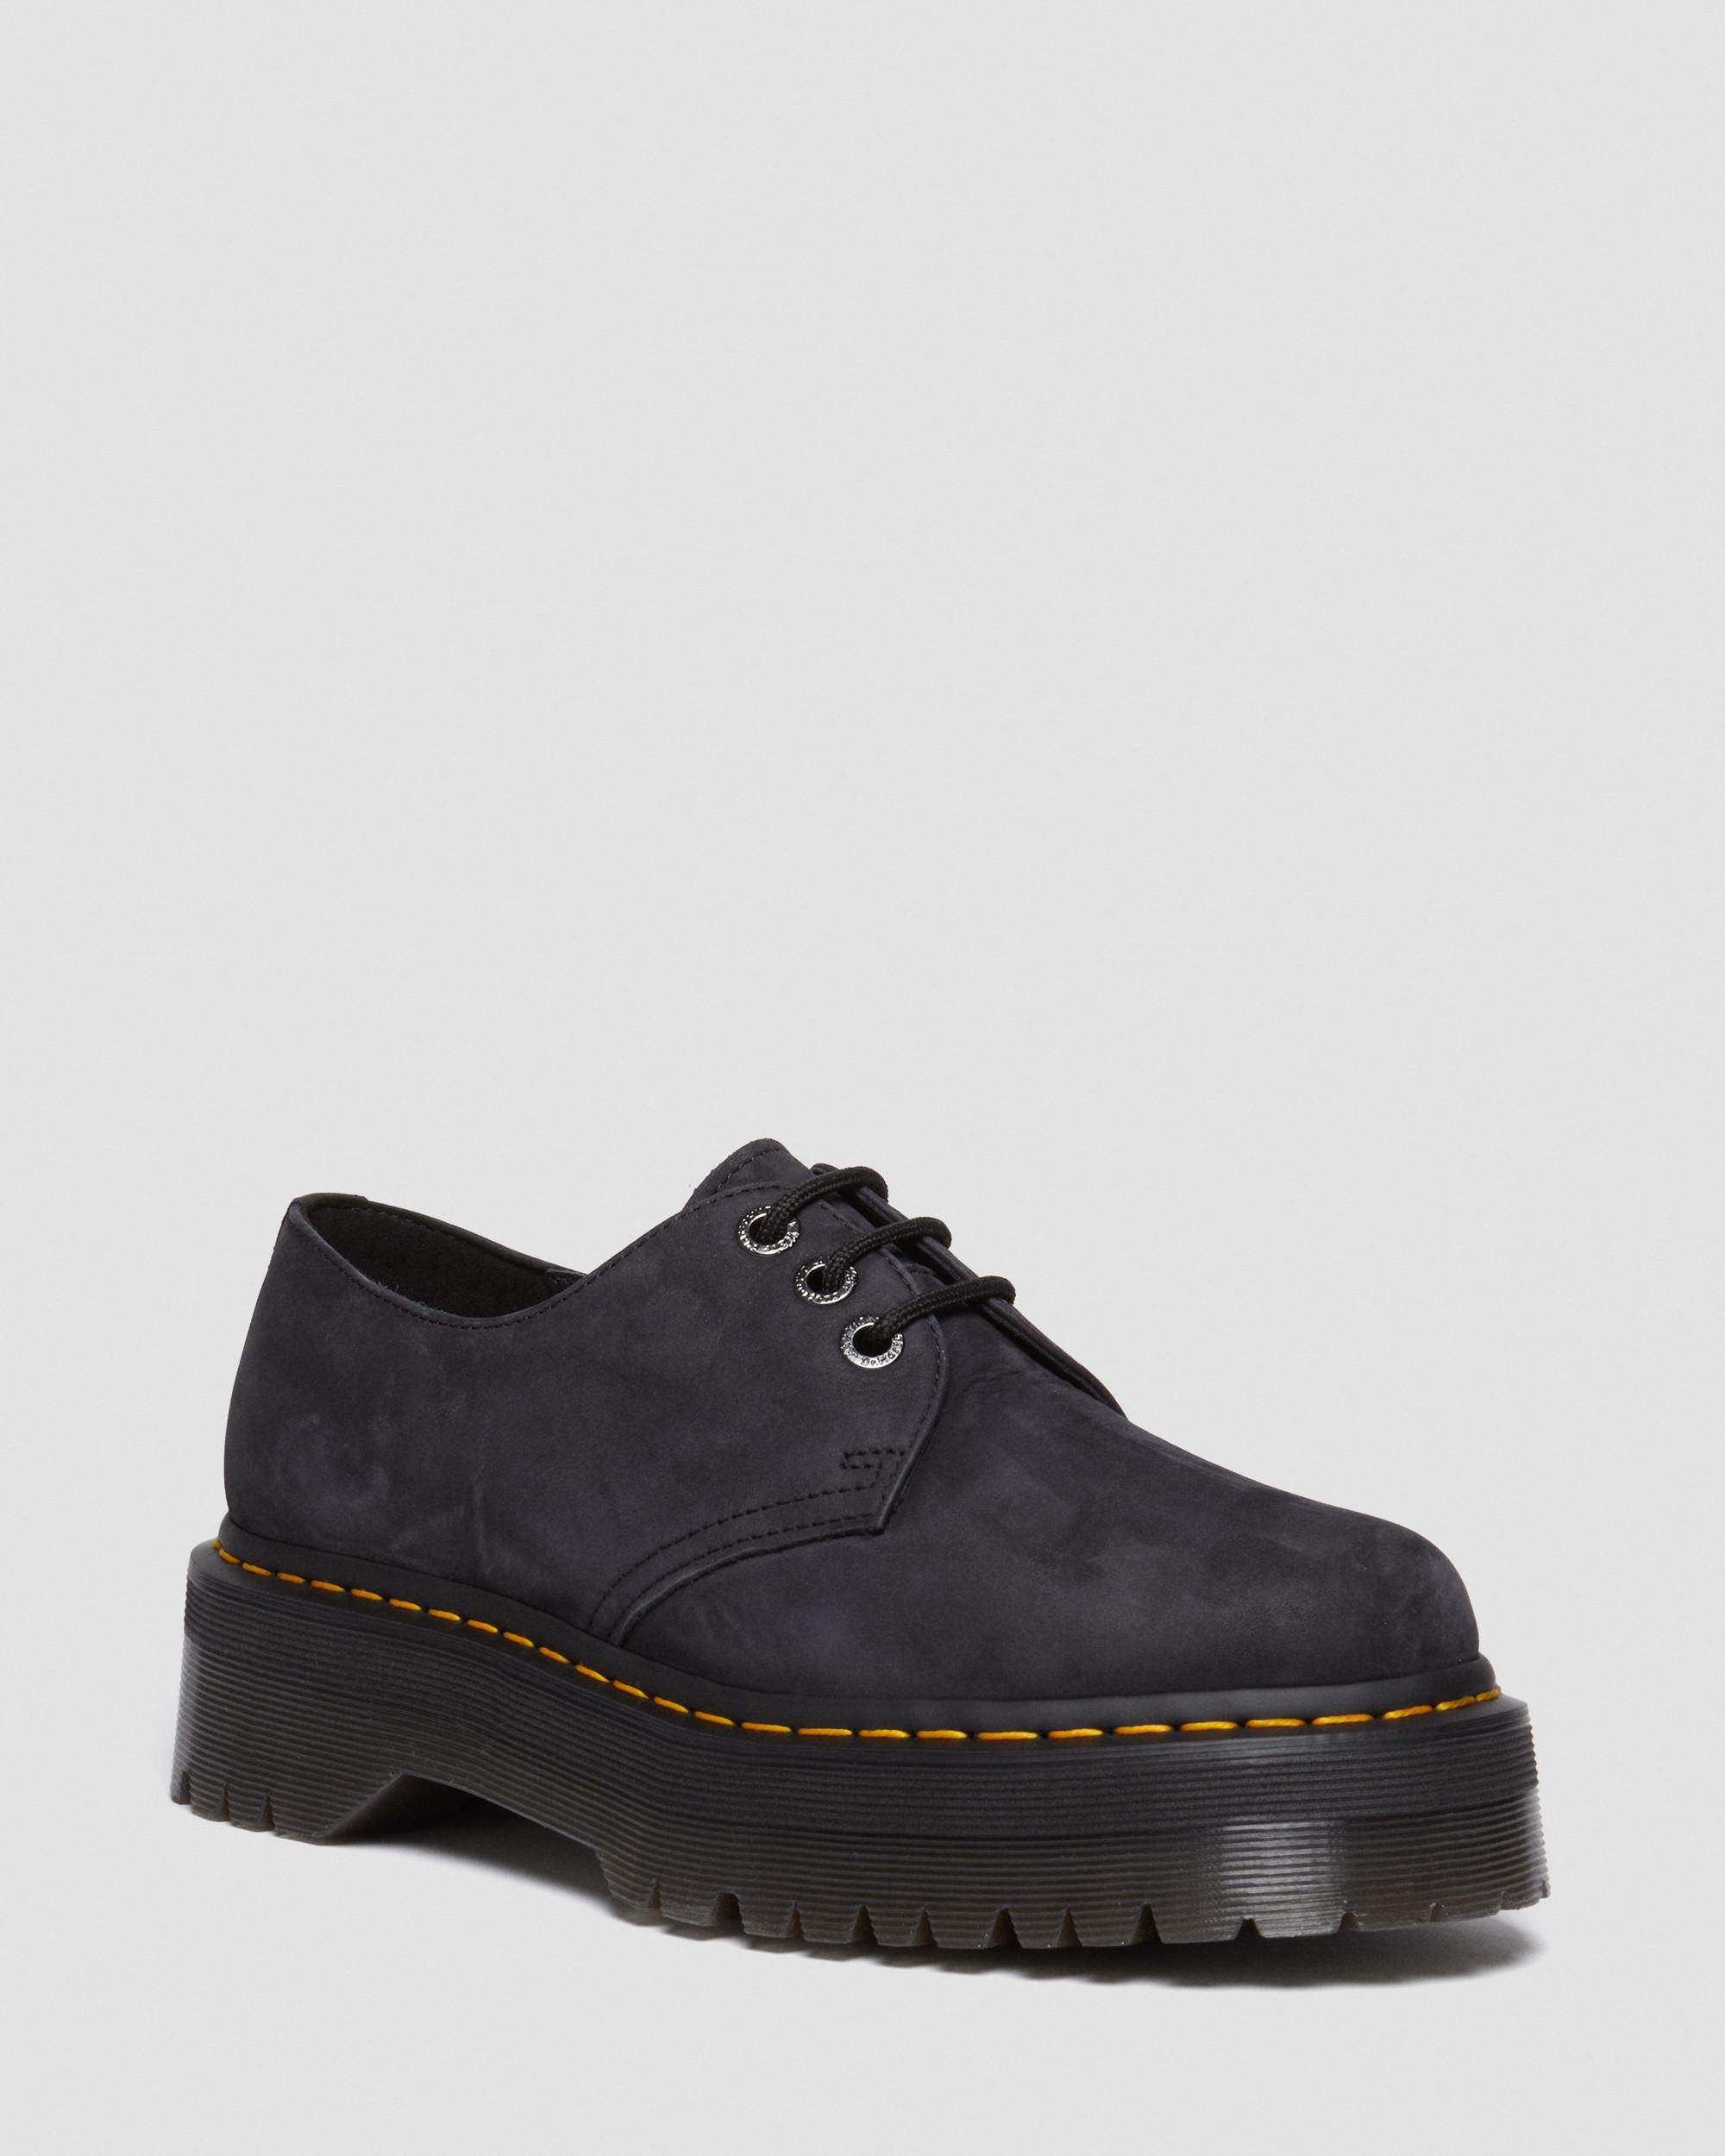 1461 II Tumbled Nubuck Leather Platform Casual Shoes in 